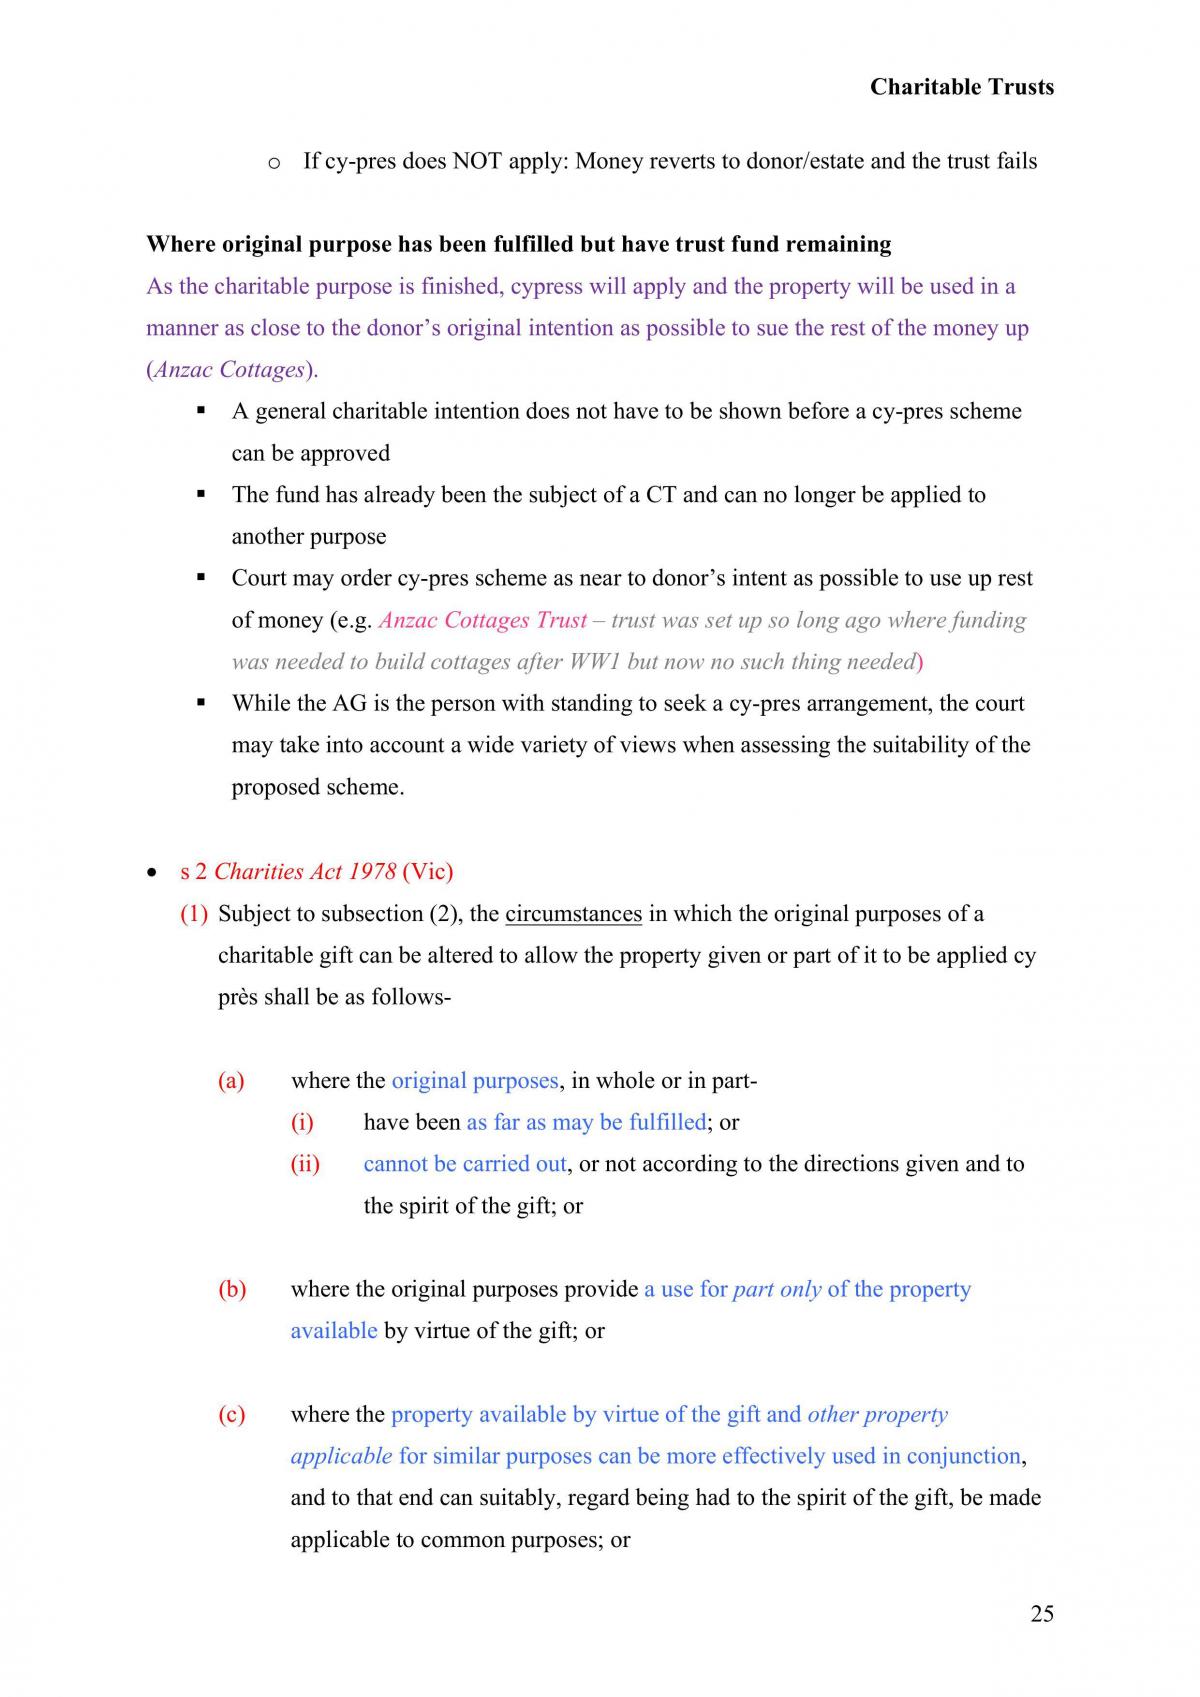 Charitable Trusts Notes - Page 25